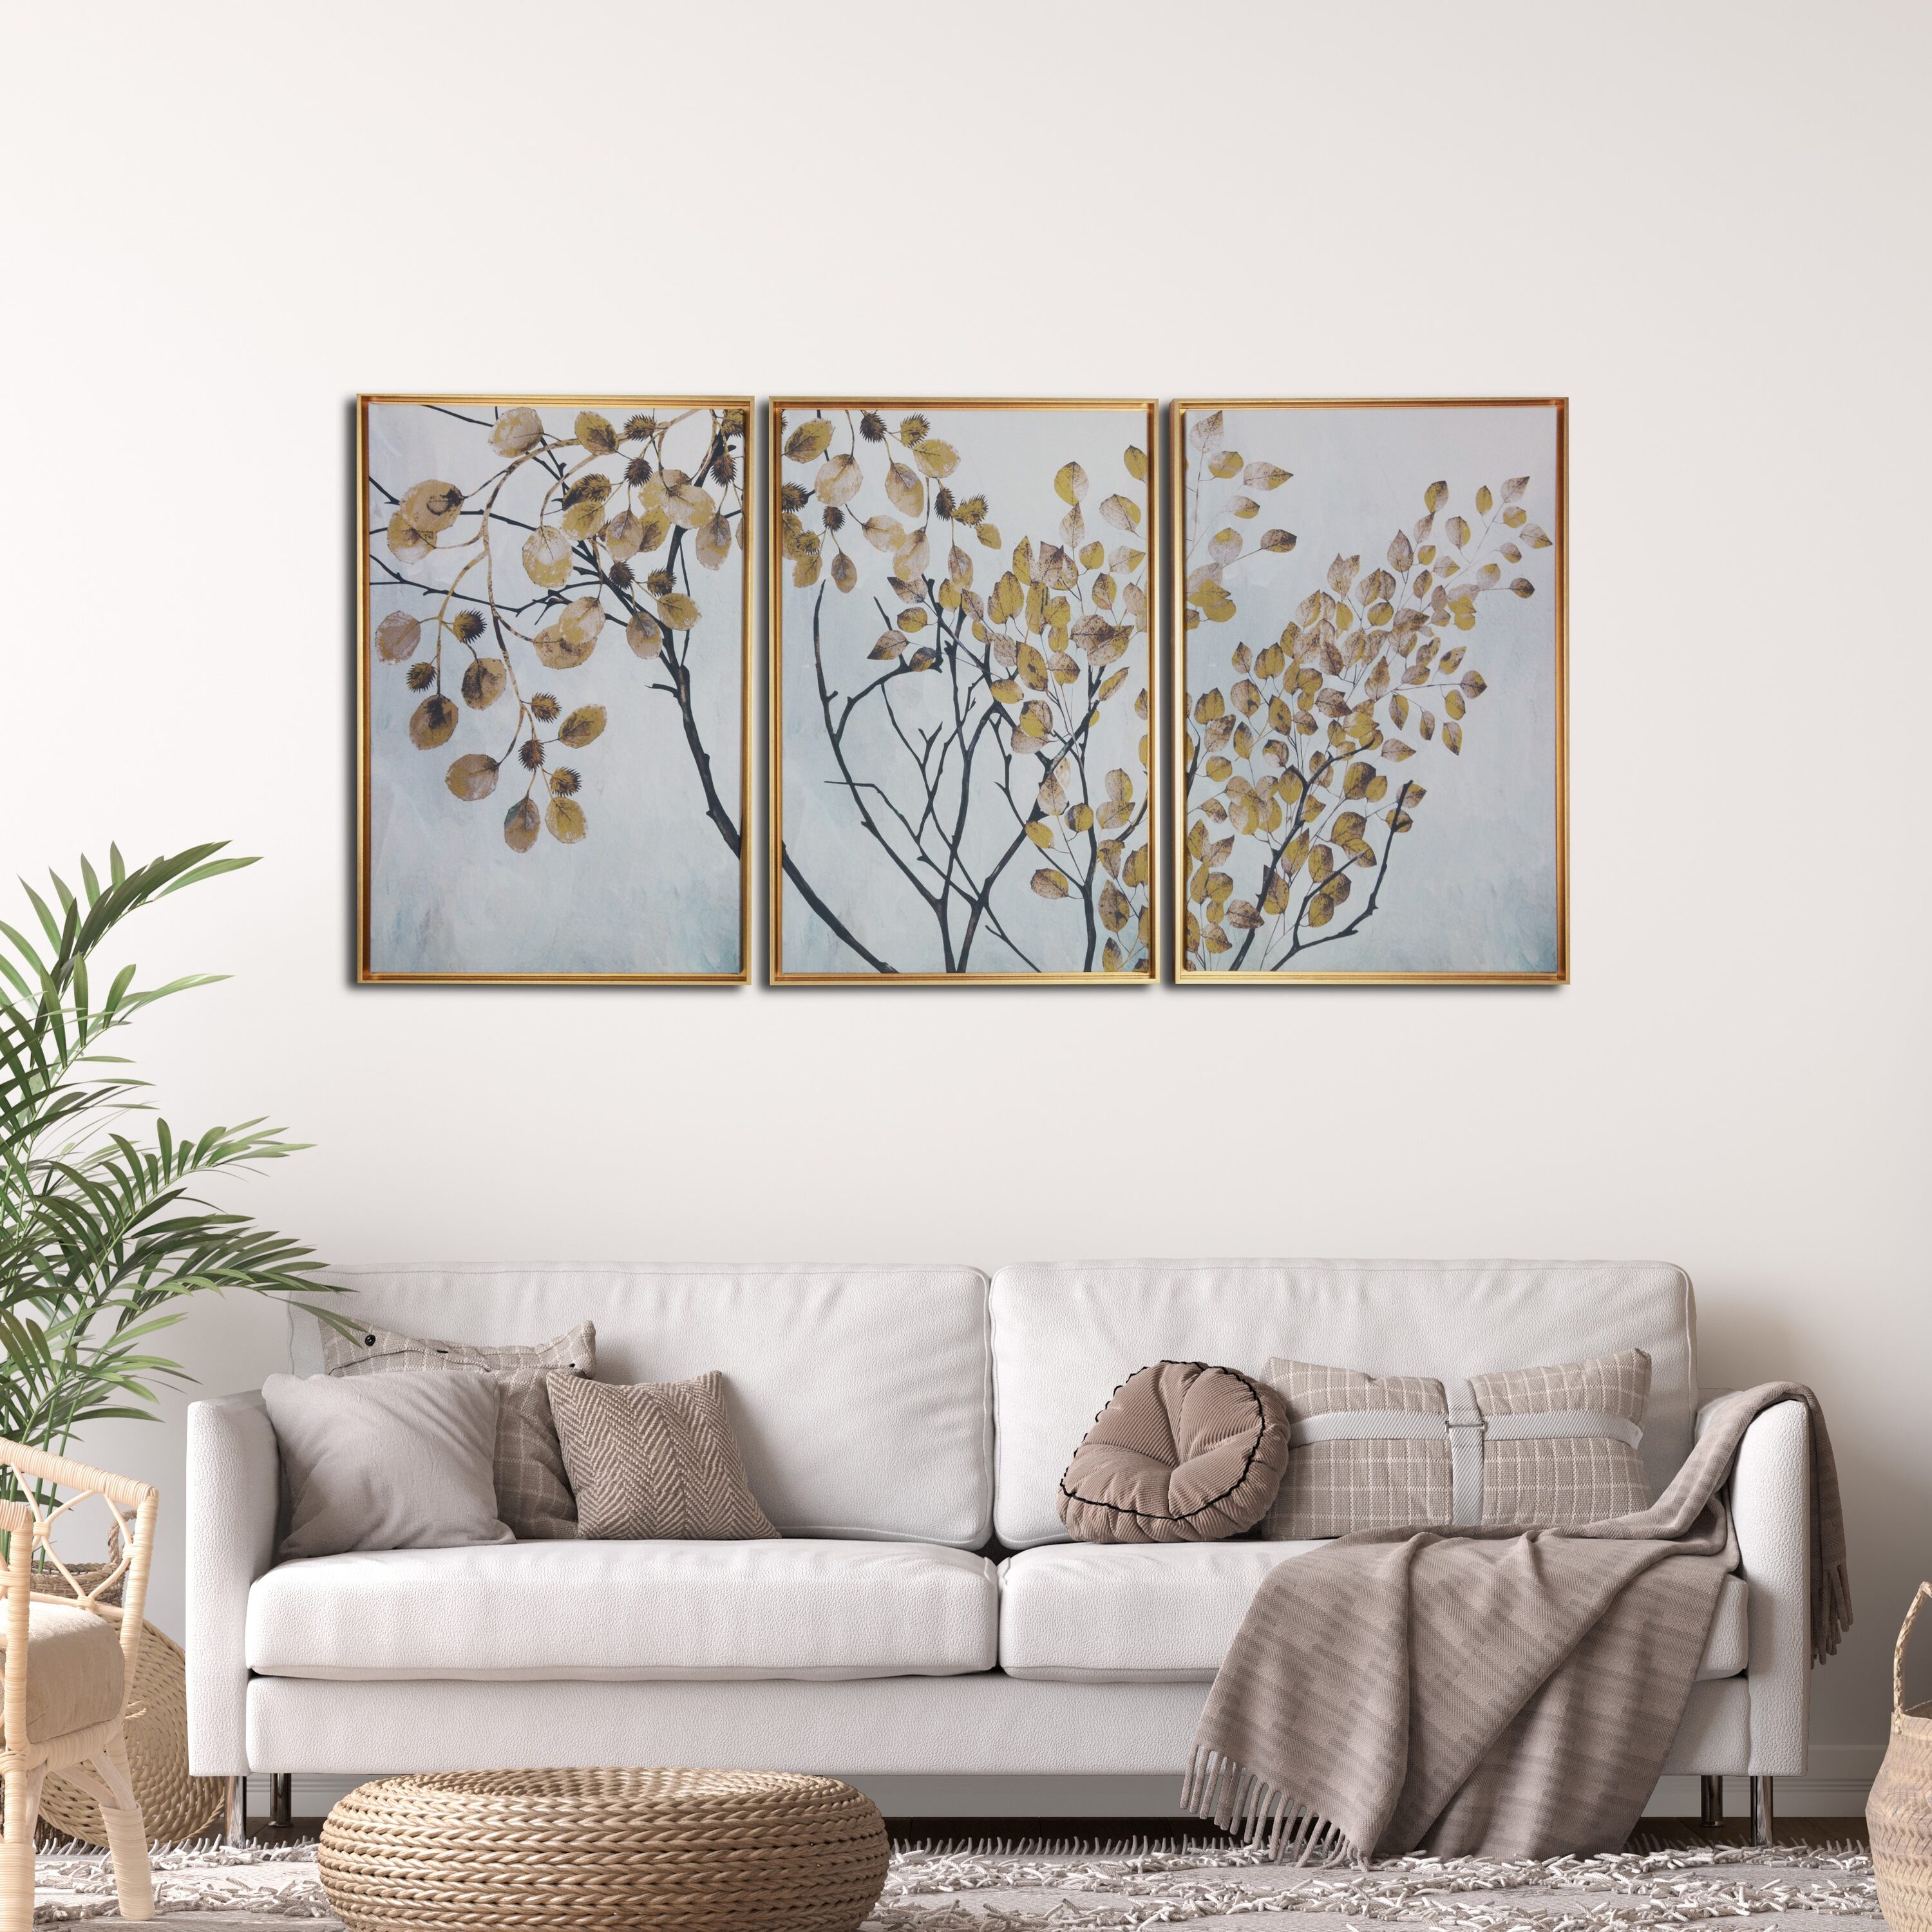 Gallery 57 Gold Framed 24-in H x 48-in W Botanical Print on Canvas in ...